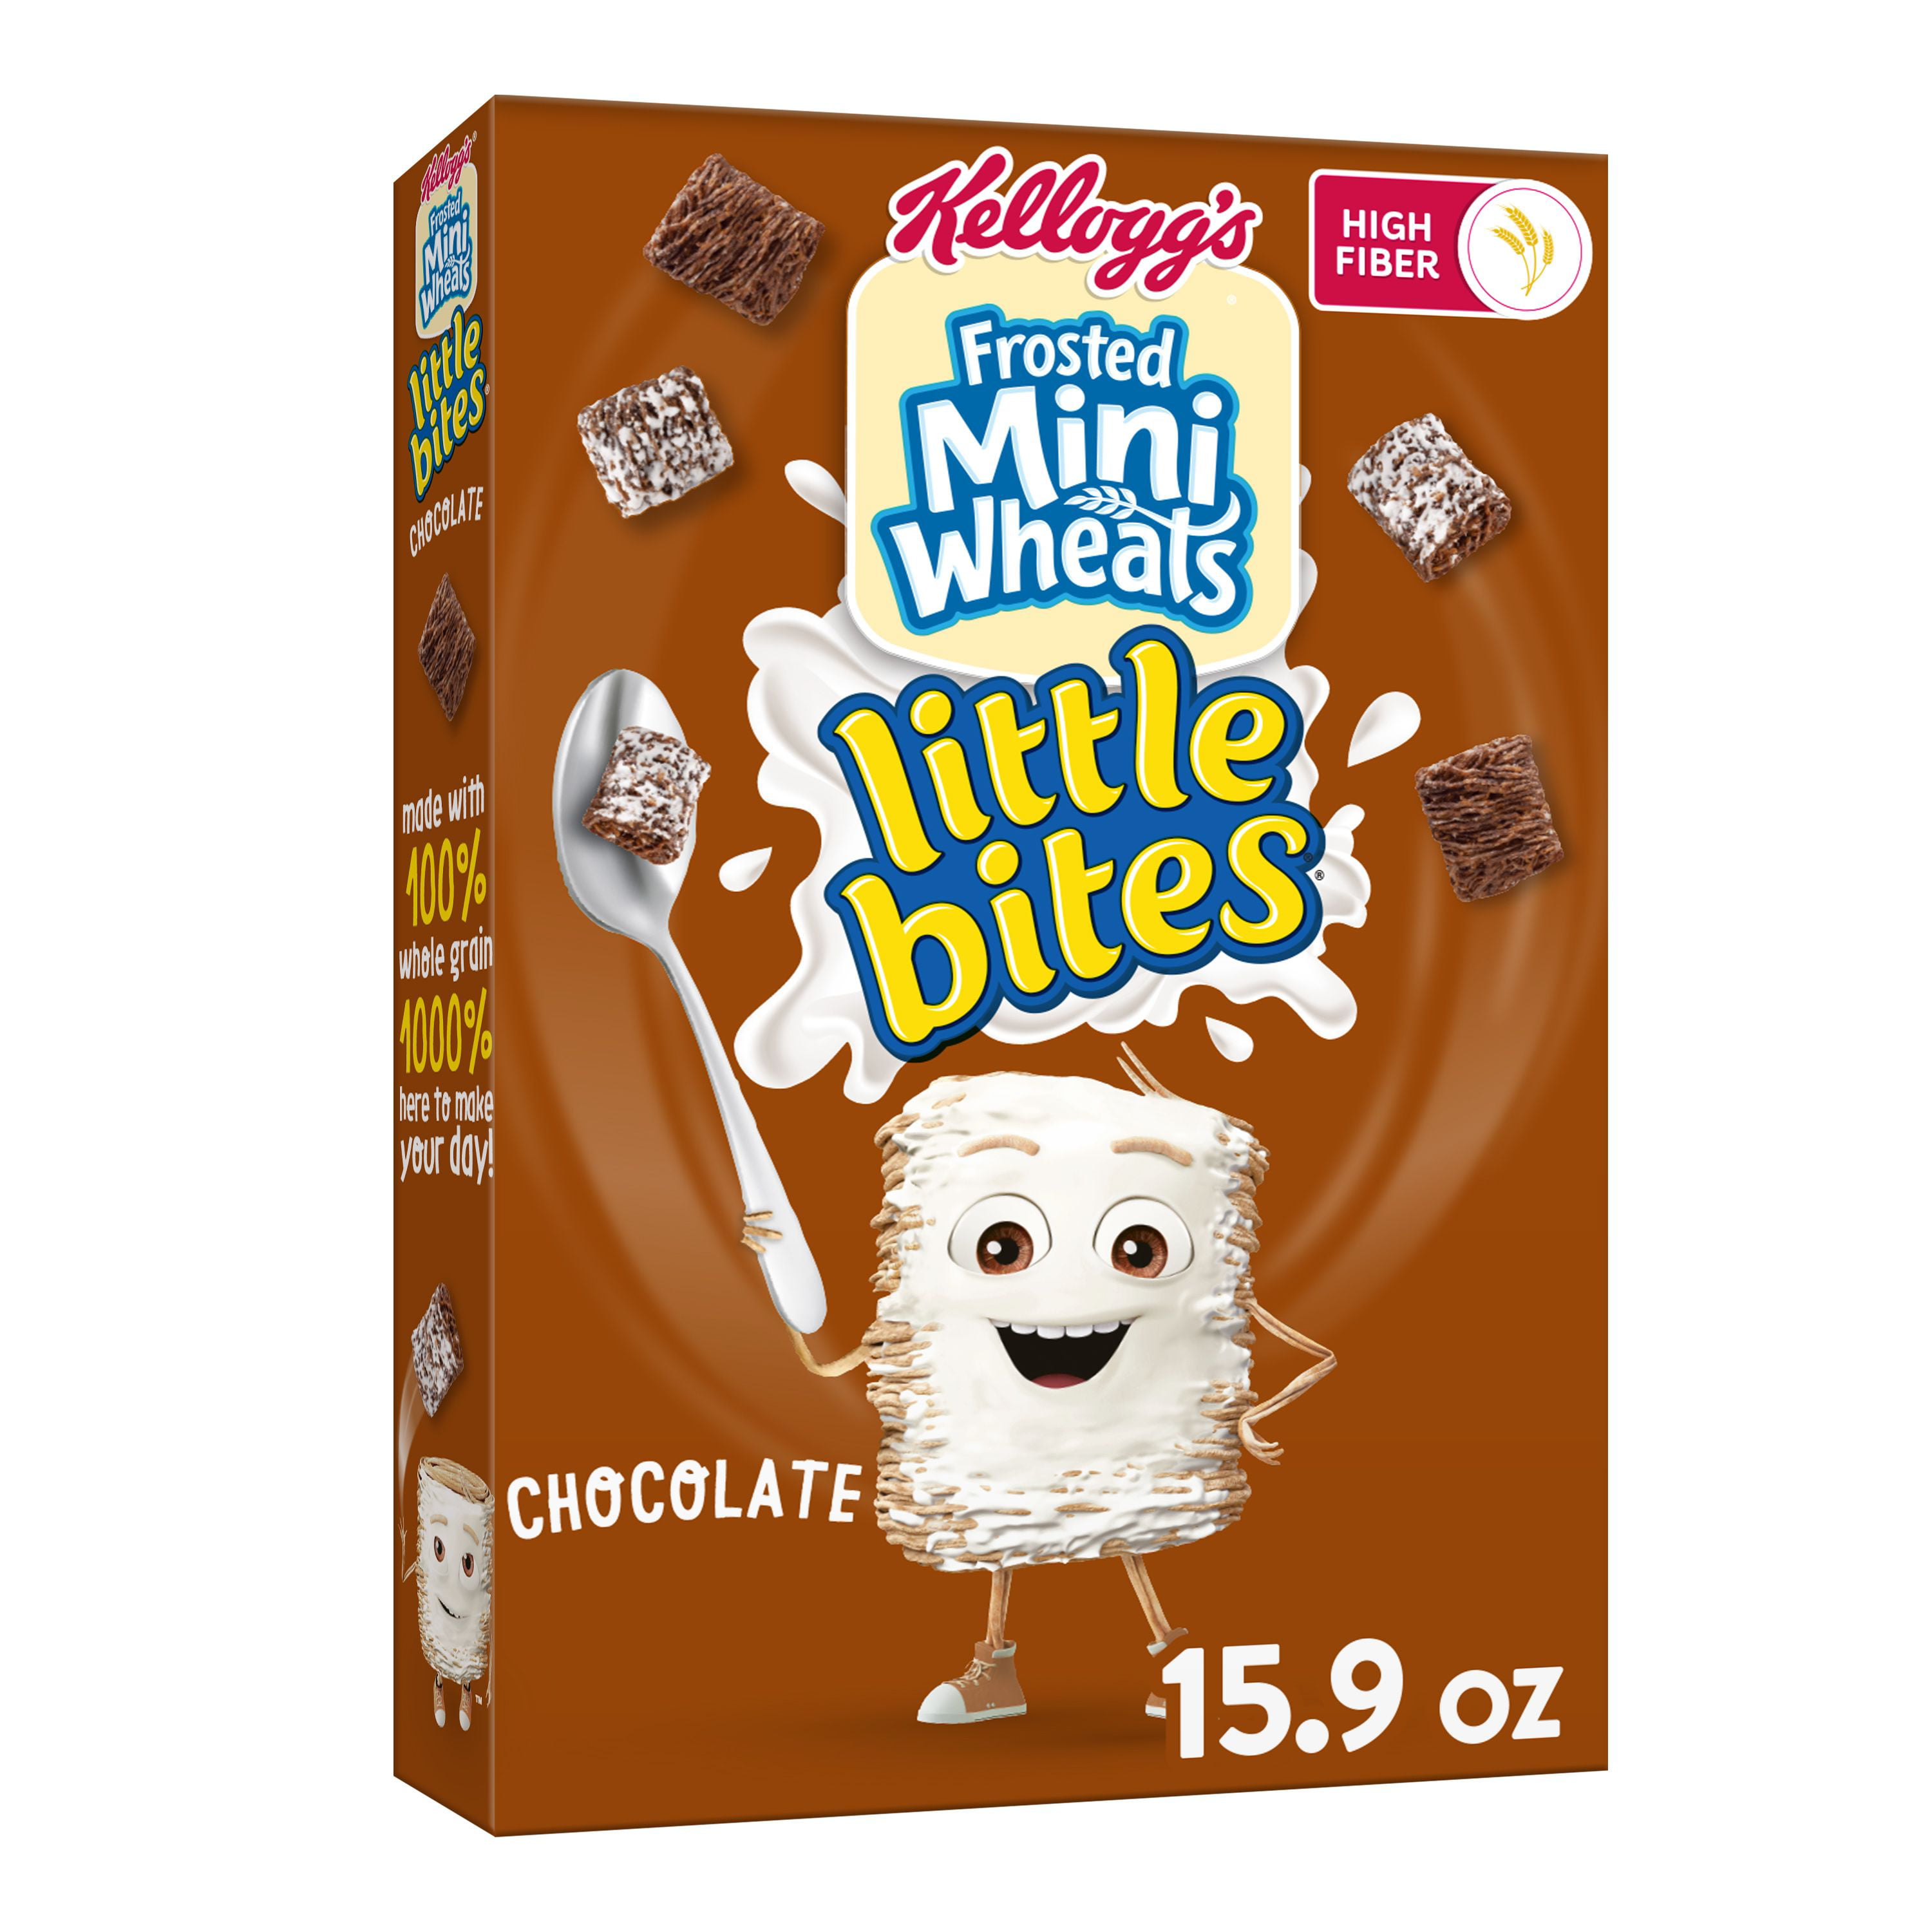 Frosted Mini Wheats Products Online Shopping Store | Buy Frosted Mini Wheats  Products at Low Prices in Ghana